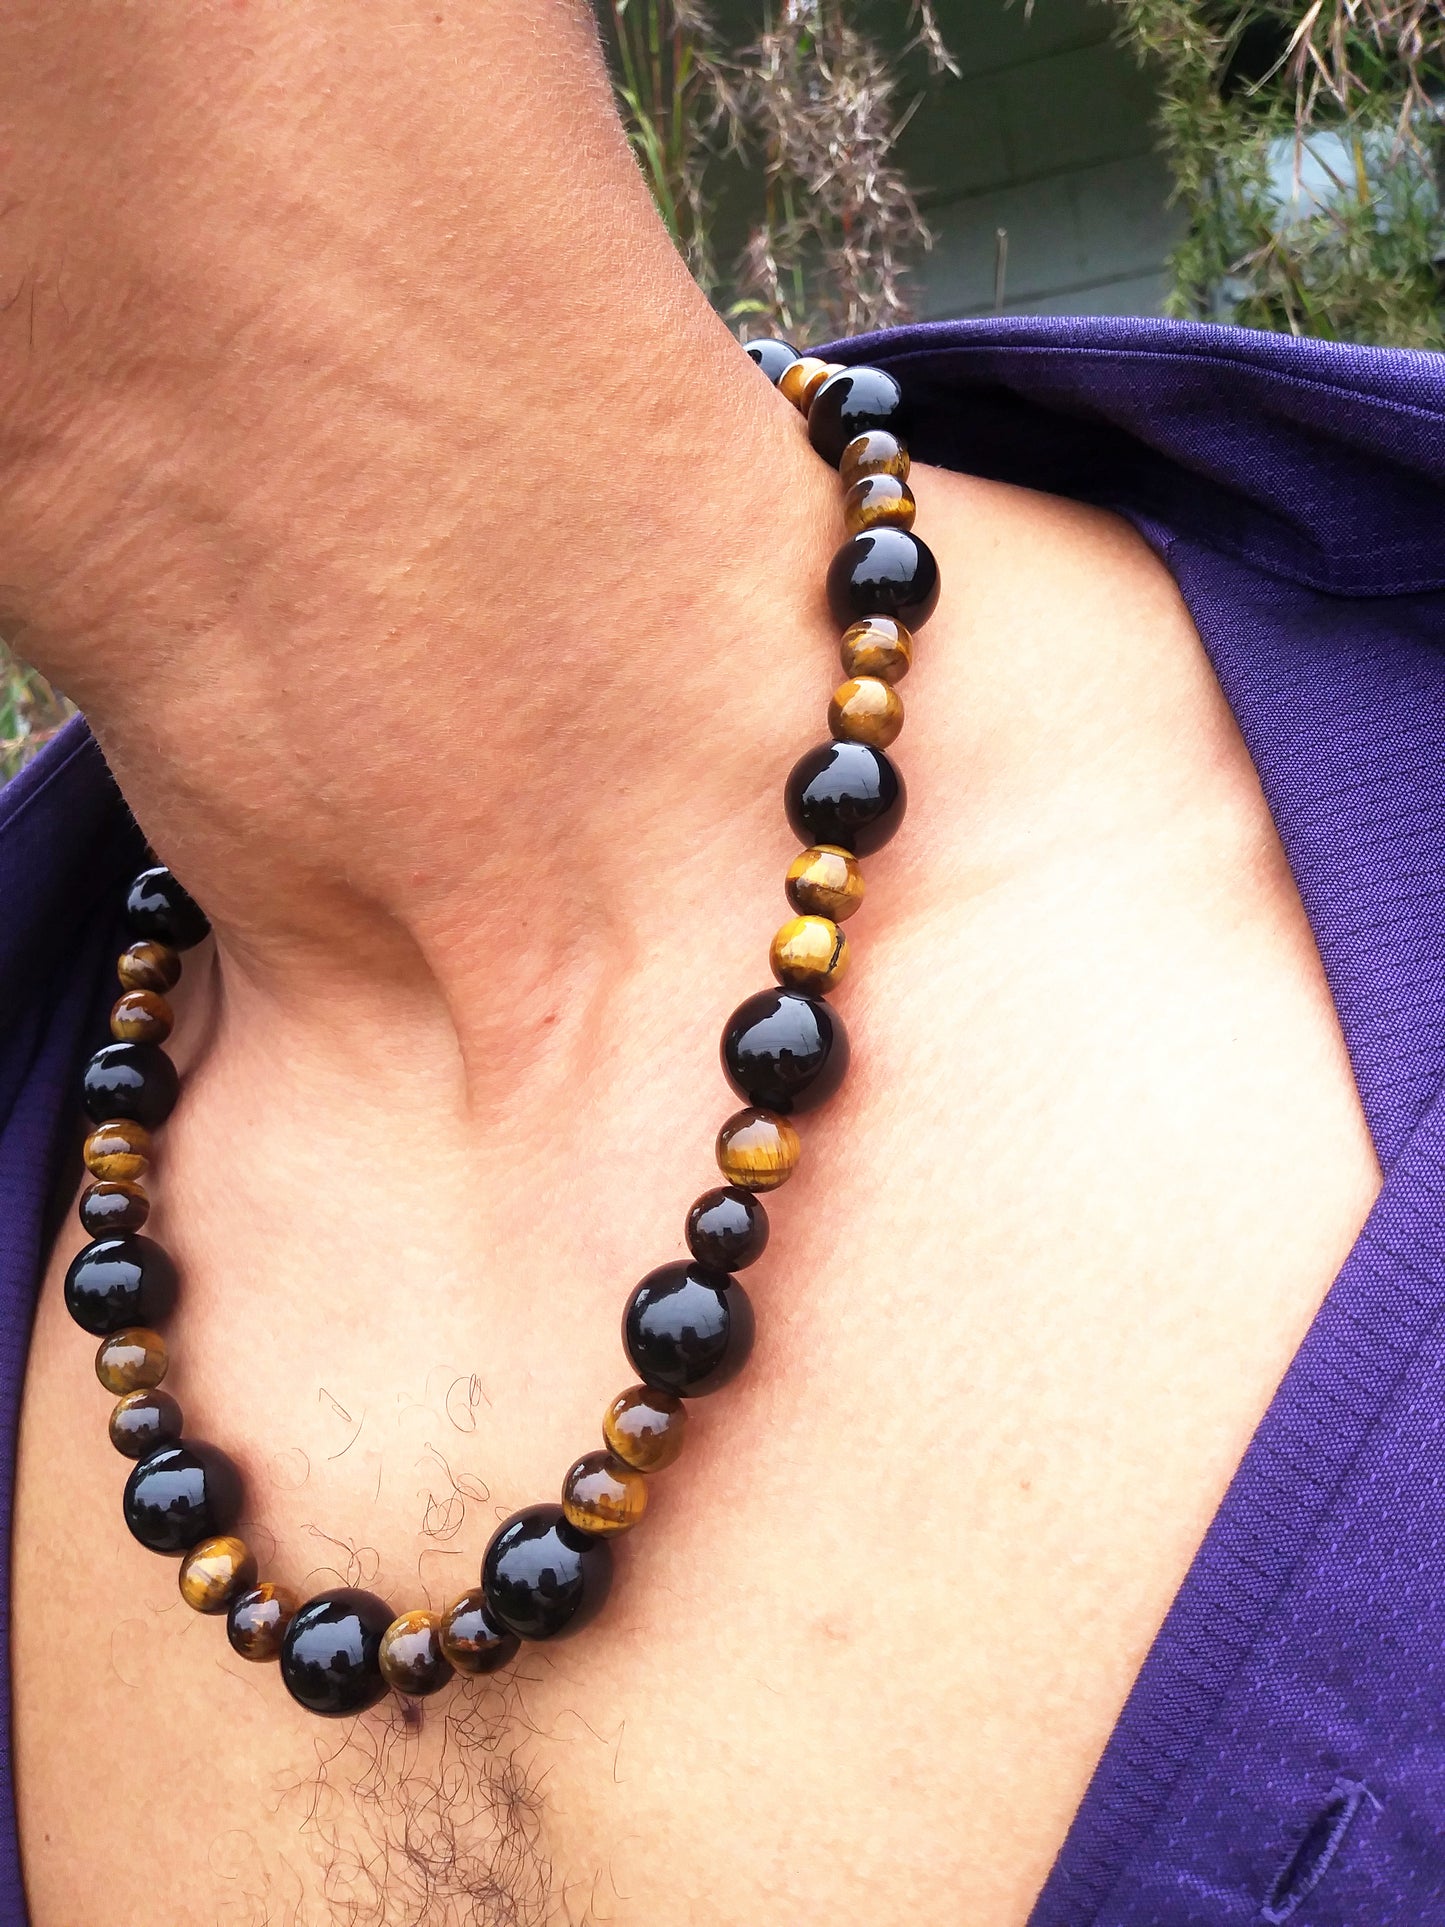 Tiger Eye Black Onyx Necklace - 22 Inches Long